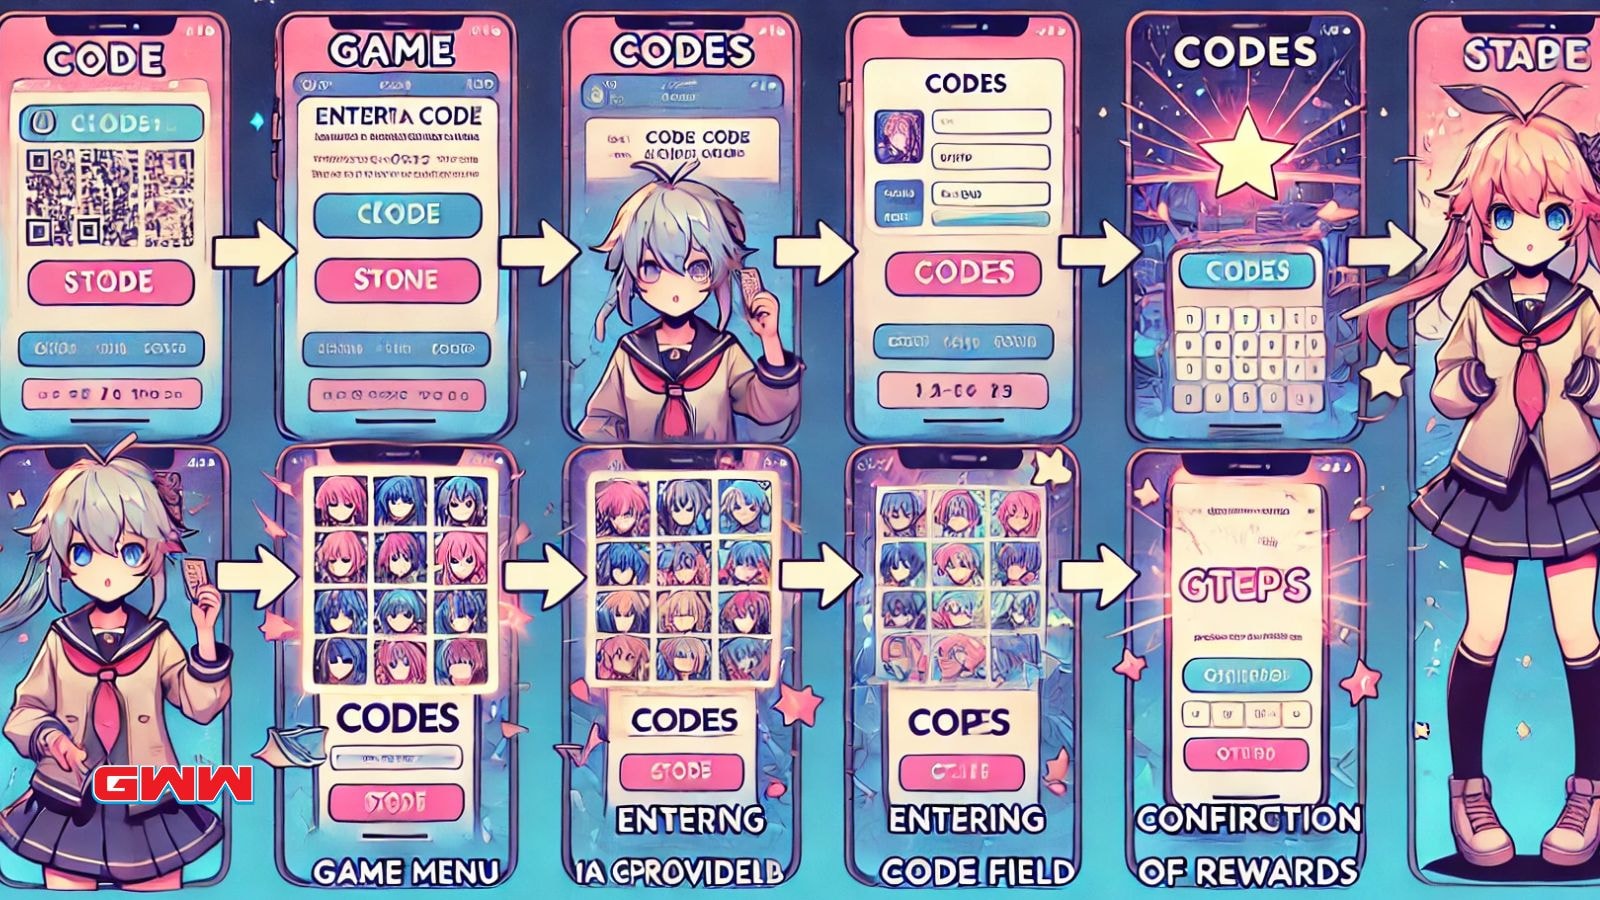 Anime Switch codes redemption step-by-step visual guide"